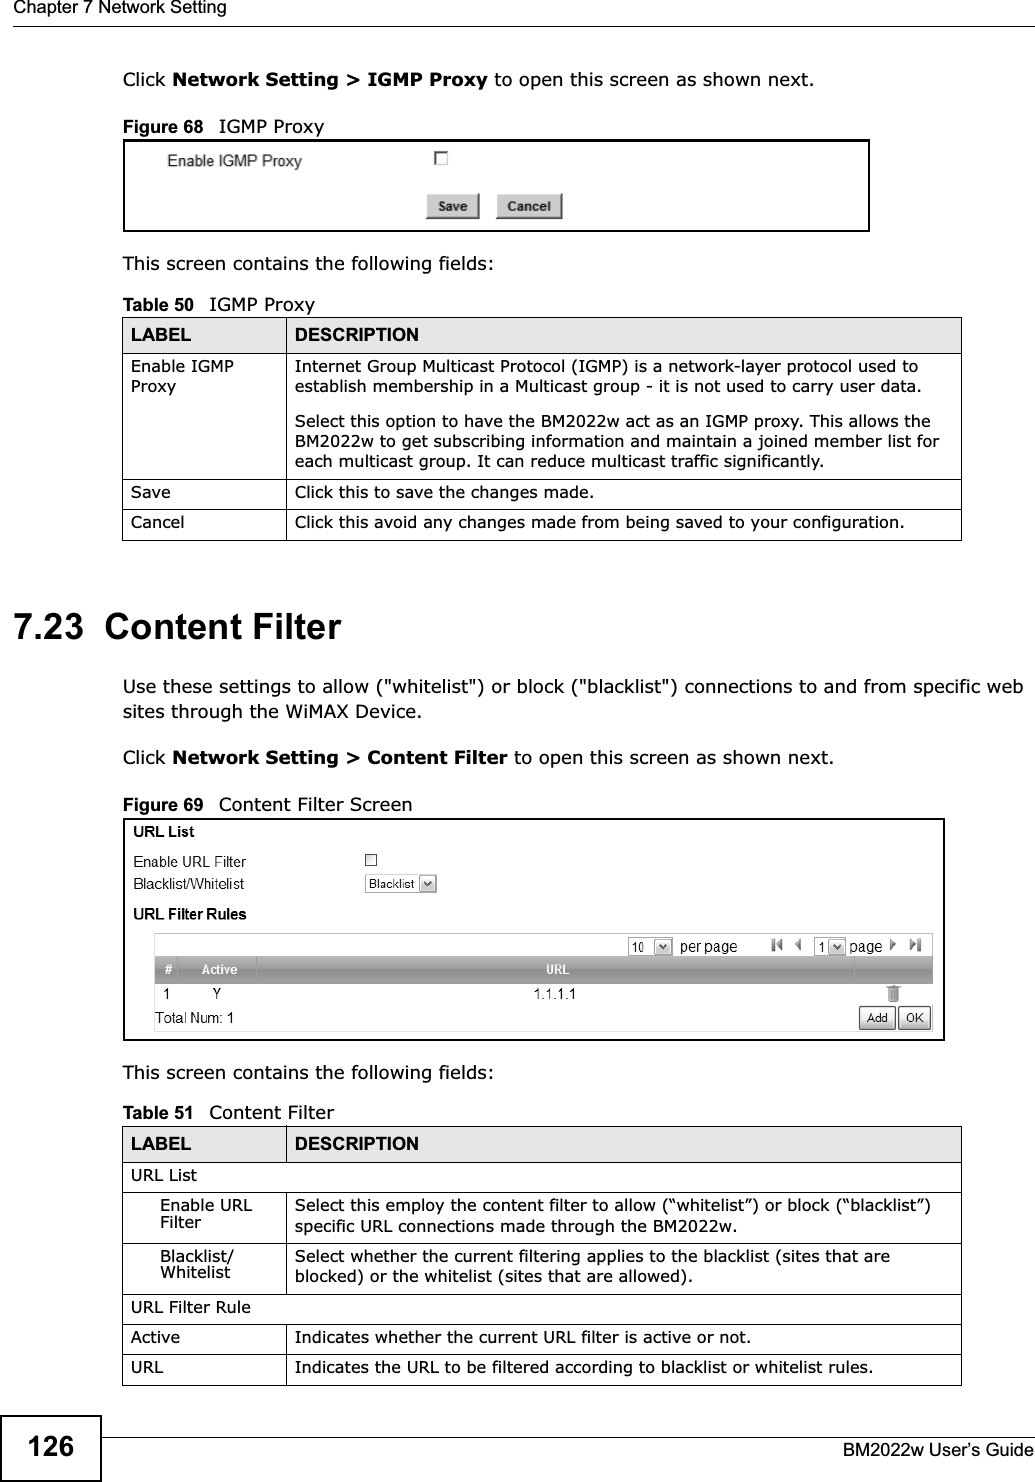 Chapter 7 Network SettingBM2022w User’s Guide126Click Network Setting &gt; IGMP Proxy to open this screen as shown next.Figure 68   IGMP ProxyThis screen contains the following fields:7.23  Content FilterUse these settings to allow (&quot;whitelist&quot;) or block (&quot;blacklist&quot;) connections to and from specific web sites through the WiMAX Device.Click Network Setting &gt; Content Filter to open this screen as shown next.Figure 69   Content Filter ScreenThis screen contains the following fields:Table 50   IGMP ProxyLABEL DESCRIPTIONEnable IGMP ProxyInternet Group Multicast Protocol (IGMP) is a network-layer protocol used to establish membership in a Multicast group - it is not used to carry user data.Select this option to have the BM2022w act as an IGMP proxy. This allows the BM2022w to get subscribing information and maintain a joined member list for each multicast group. It can reduce multicast traffic significantly.Save Click this to save the changes made.Cancel Click this avoid any changes made from being saved to your configuration.Table 51   Content FilterLABEL DESCRIPTIONURL ListEnable URL Filter Select this employ the content filter to allow (“whitelist”) or block (“blacklist”) specific URL connections made through the BM2022w.Blacklist/Whitelist Select whether the current filtering applies to the blacklist (sites that are blocked) or the whitelist (sites that are allowed).URL Filter RuleActive Indicates whether the current URL filter is active or not.URL Indicates the URL to be filtered according to blacklist or whitelist rules.